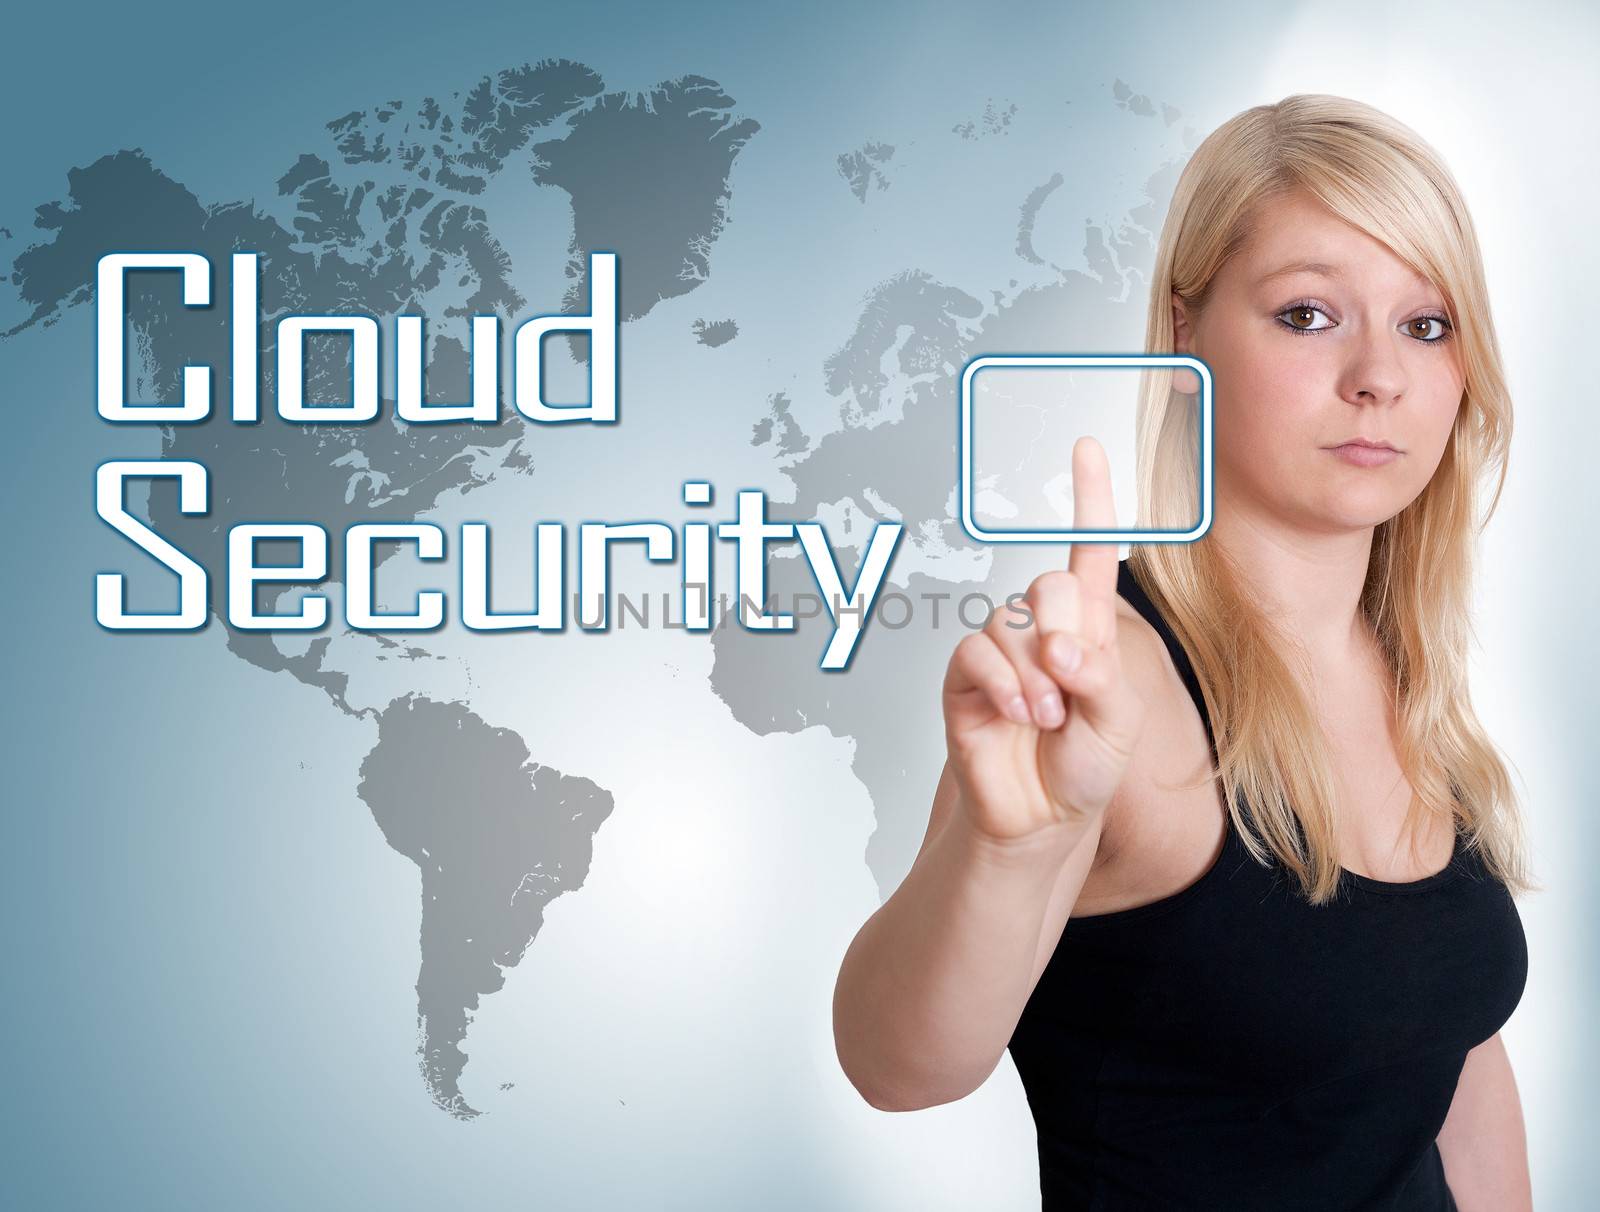 Young woman press digital Cloud Security button on interface in front of her